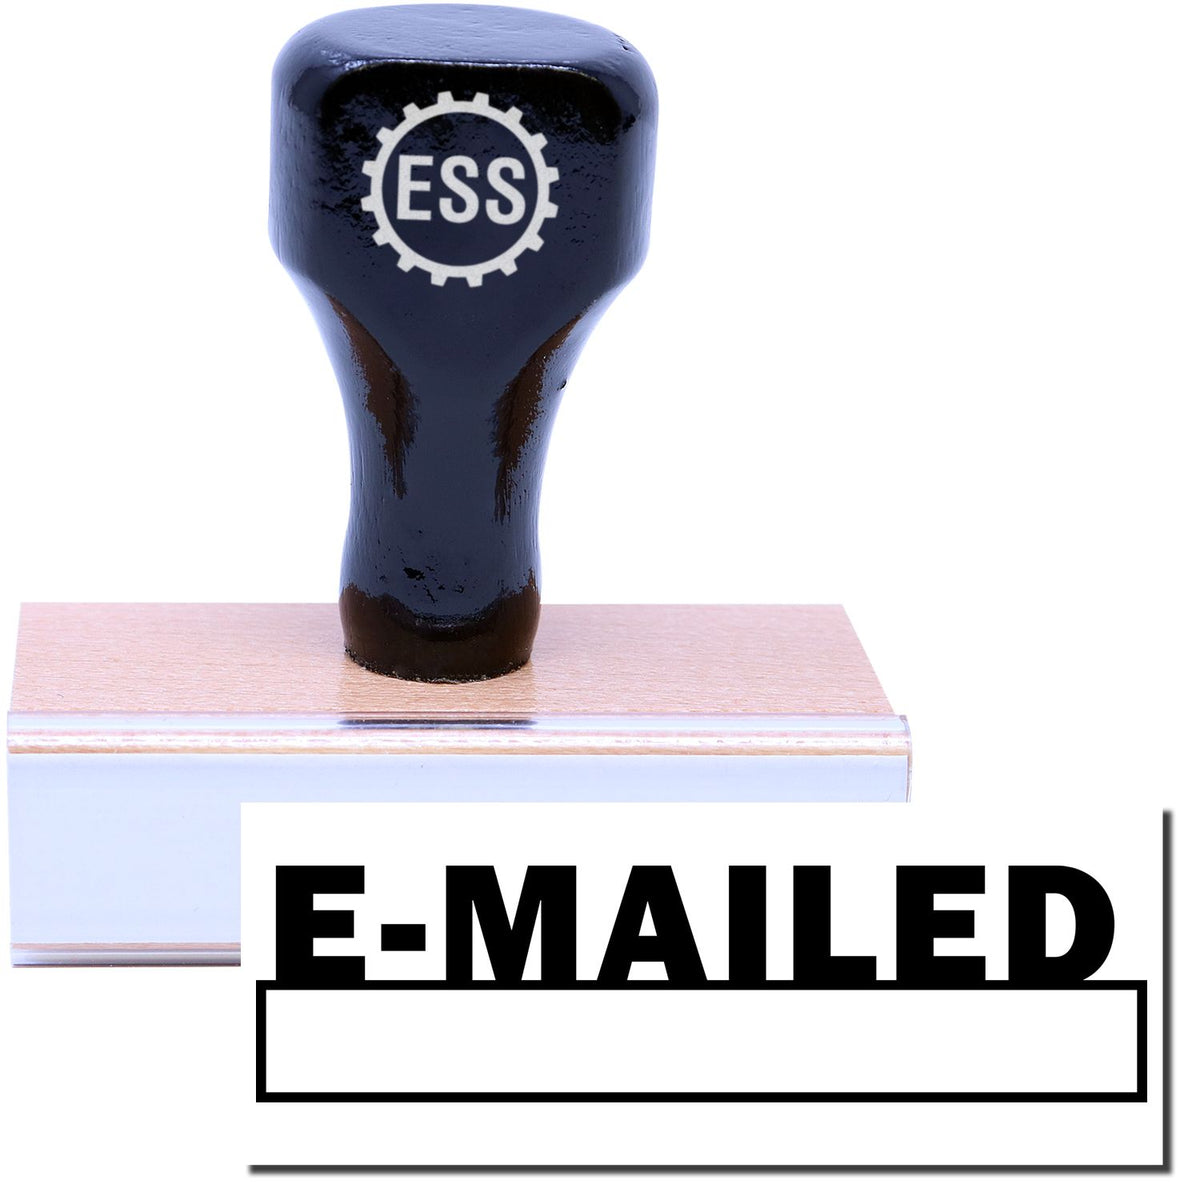 A stock office rubber stamp with a stamped image showing how the text &quot;E-MAILED&quot; with a date box underneath the text is displayed after stamping.